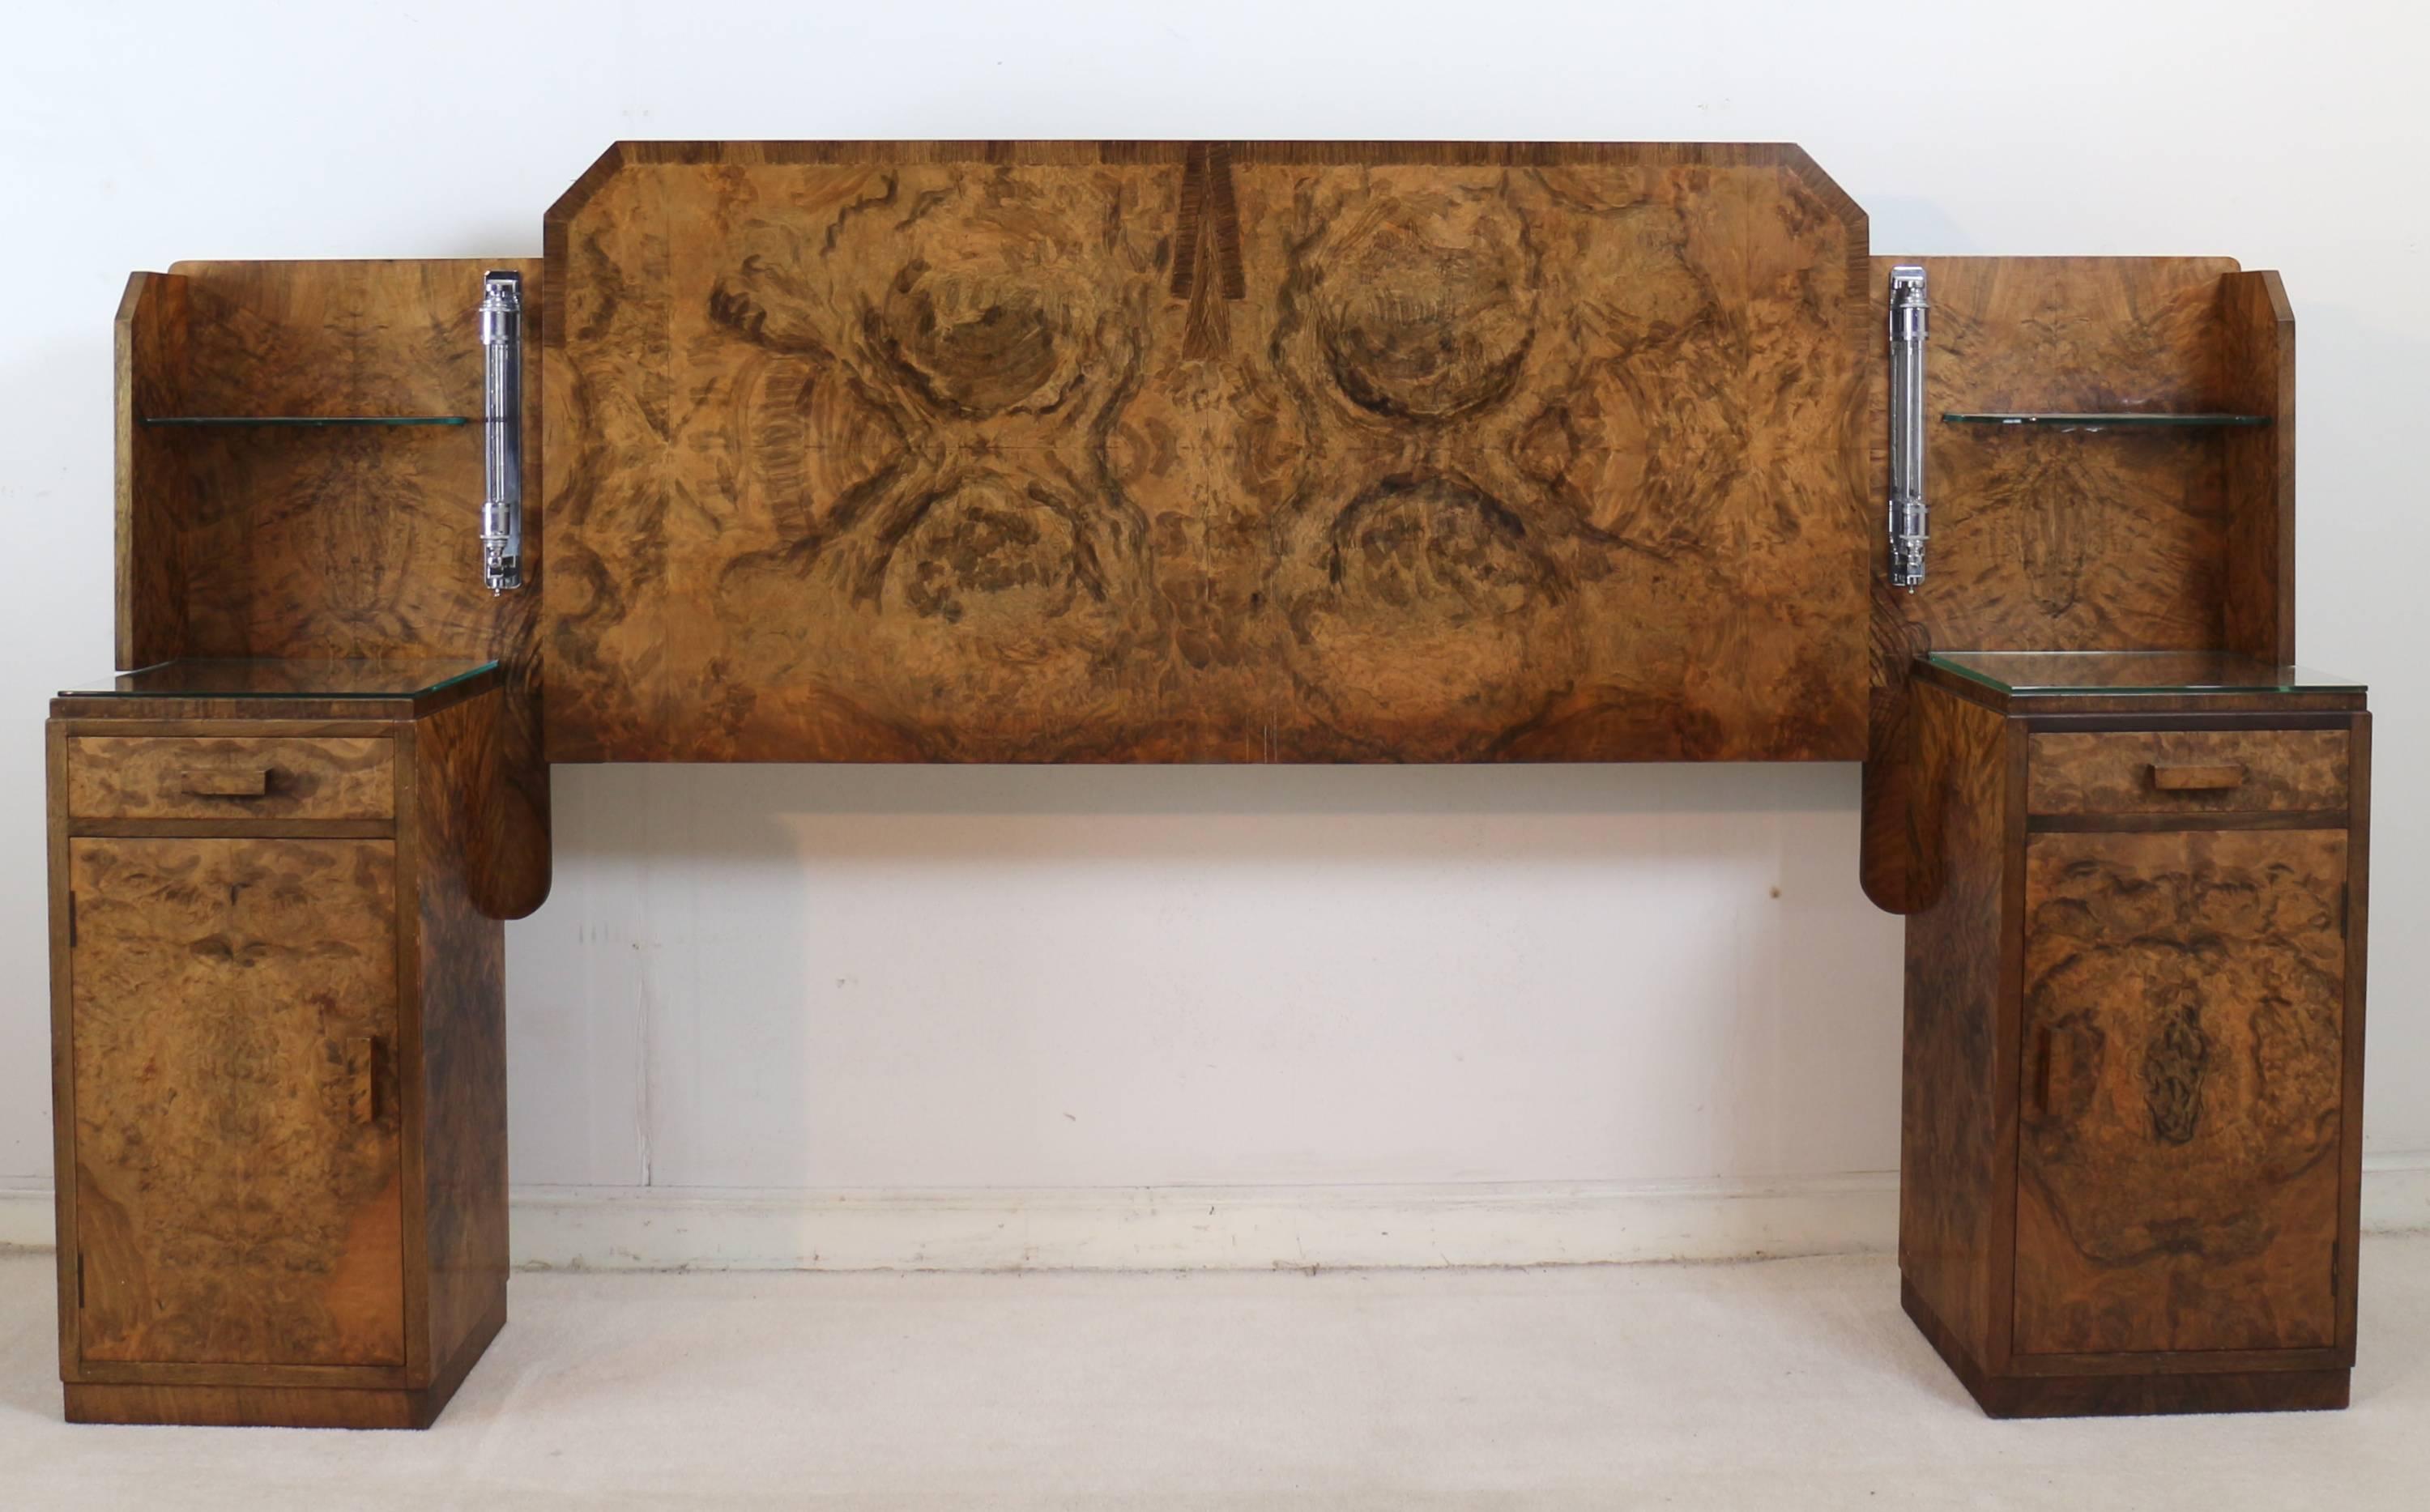 English Art Deco Burr Walnut Bedroom Suite Attributed to H & L Epstein For Sale 2